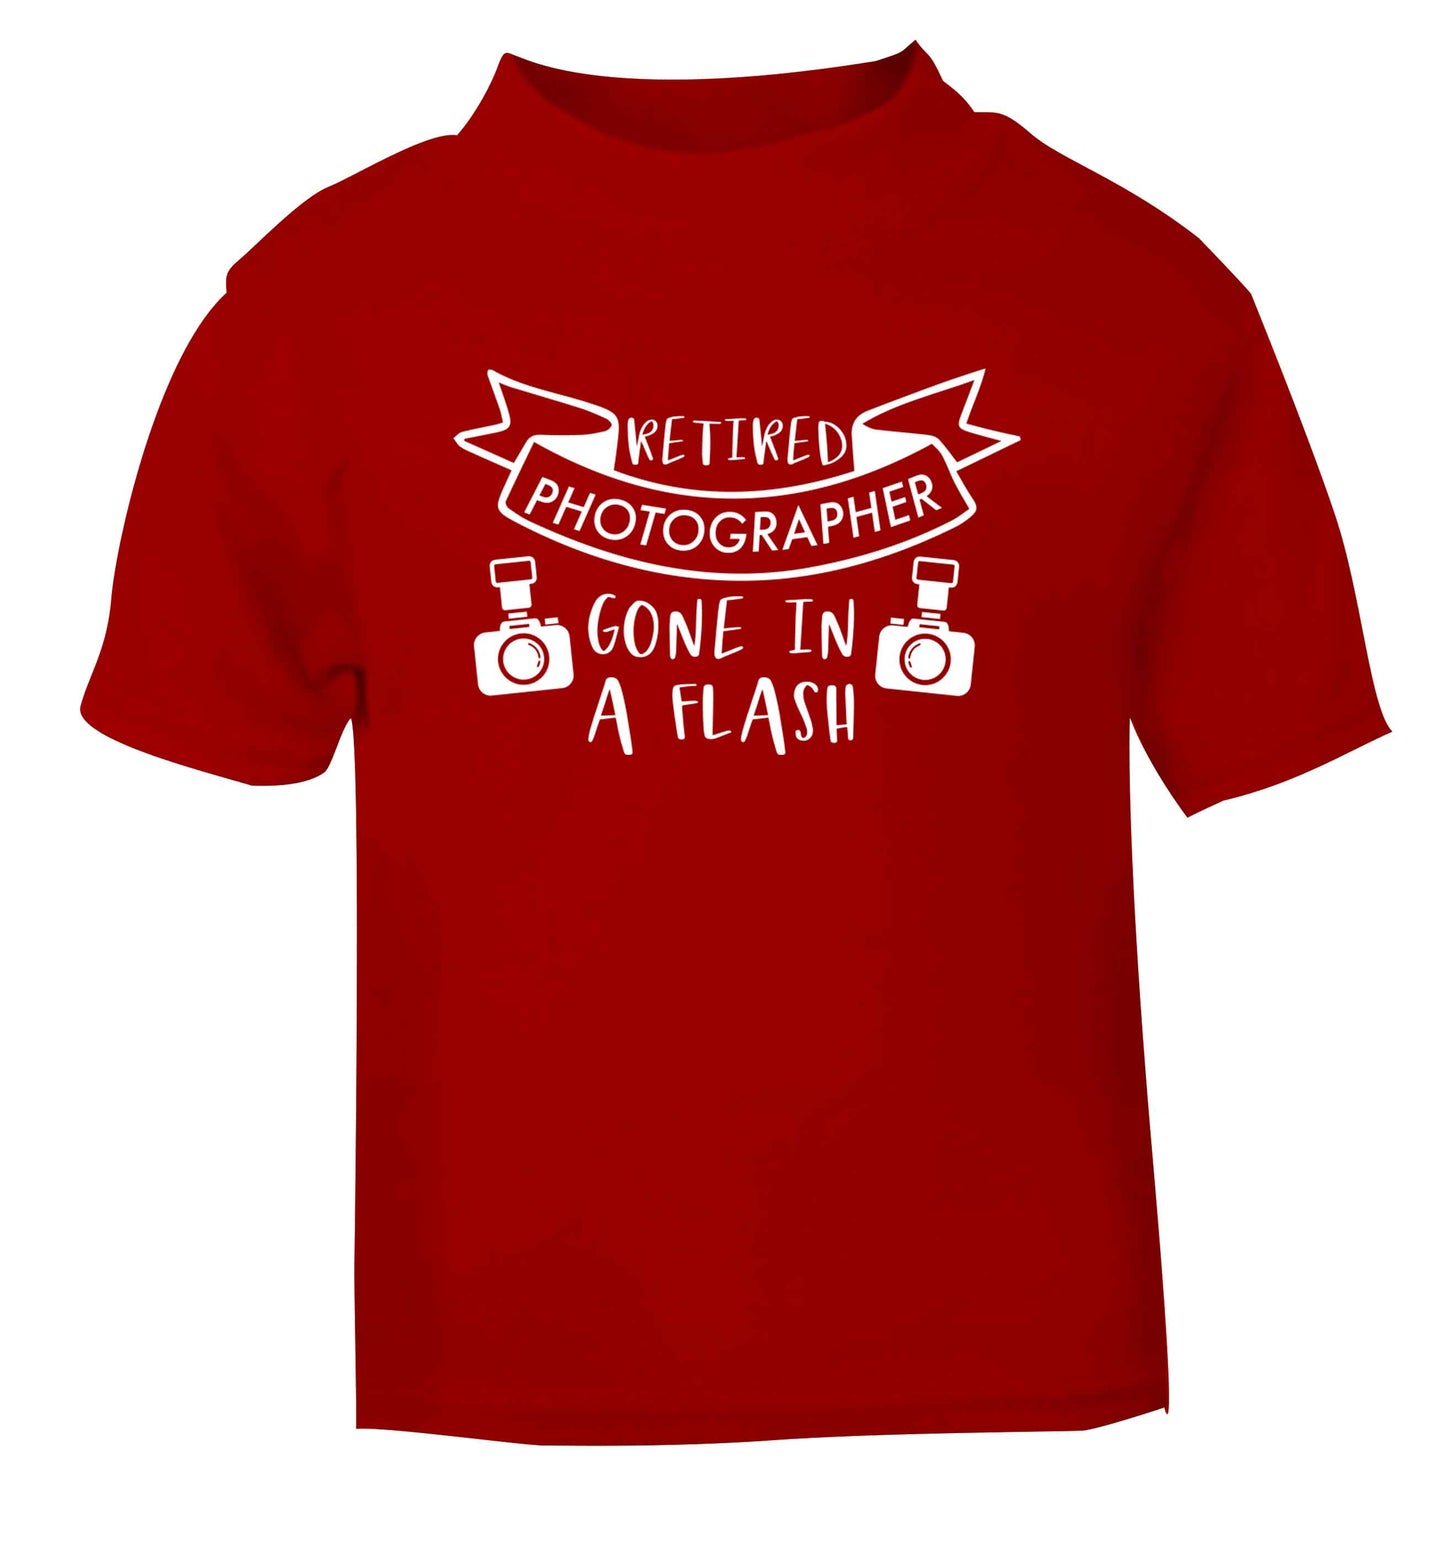 Retired photographer gone in a flash red Baby Toddler Tshirt 2 Years